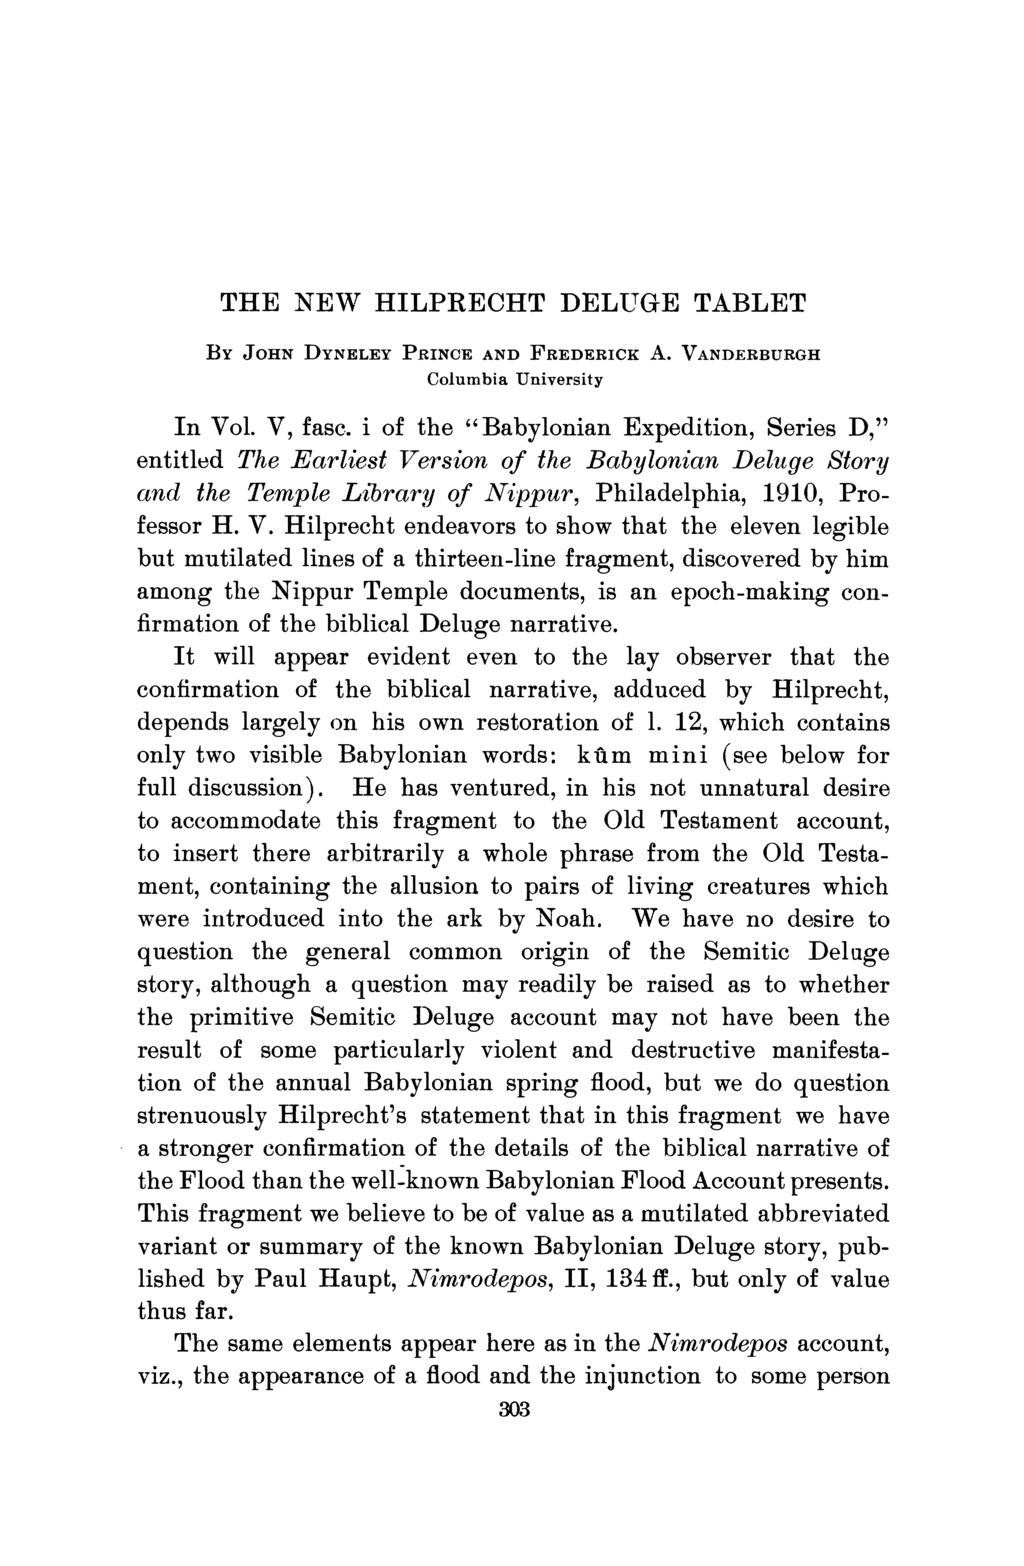 THE NEBr IIILPRECIIT DELETSE TABLET BY JOHN DYNELEY PRINCE AND FREDERICE A. VANDERBURGH Columbia University In Vol. V, fasc.